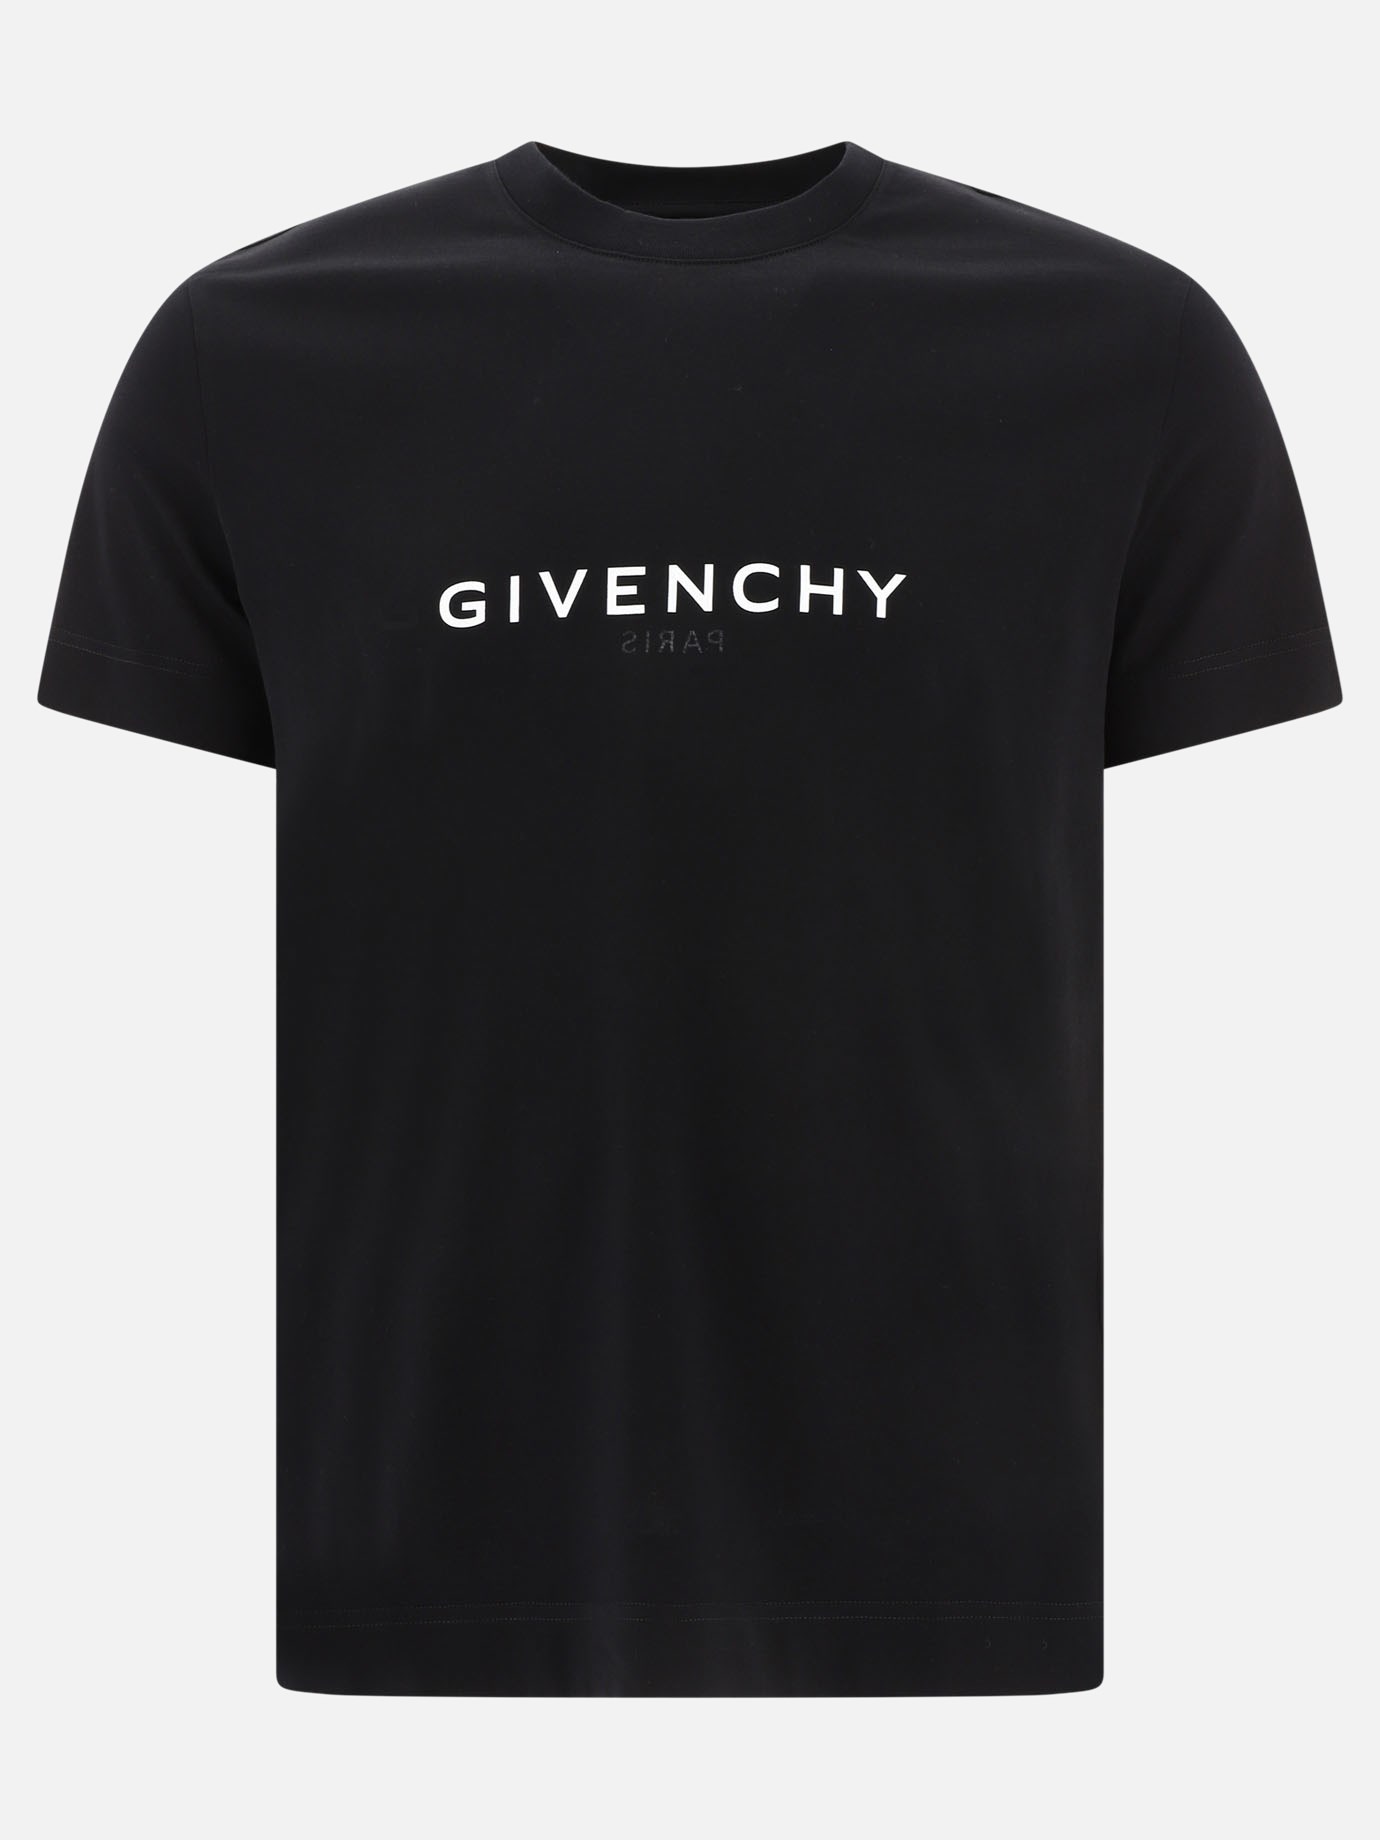  Reverse  t-shirt by Givenchy